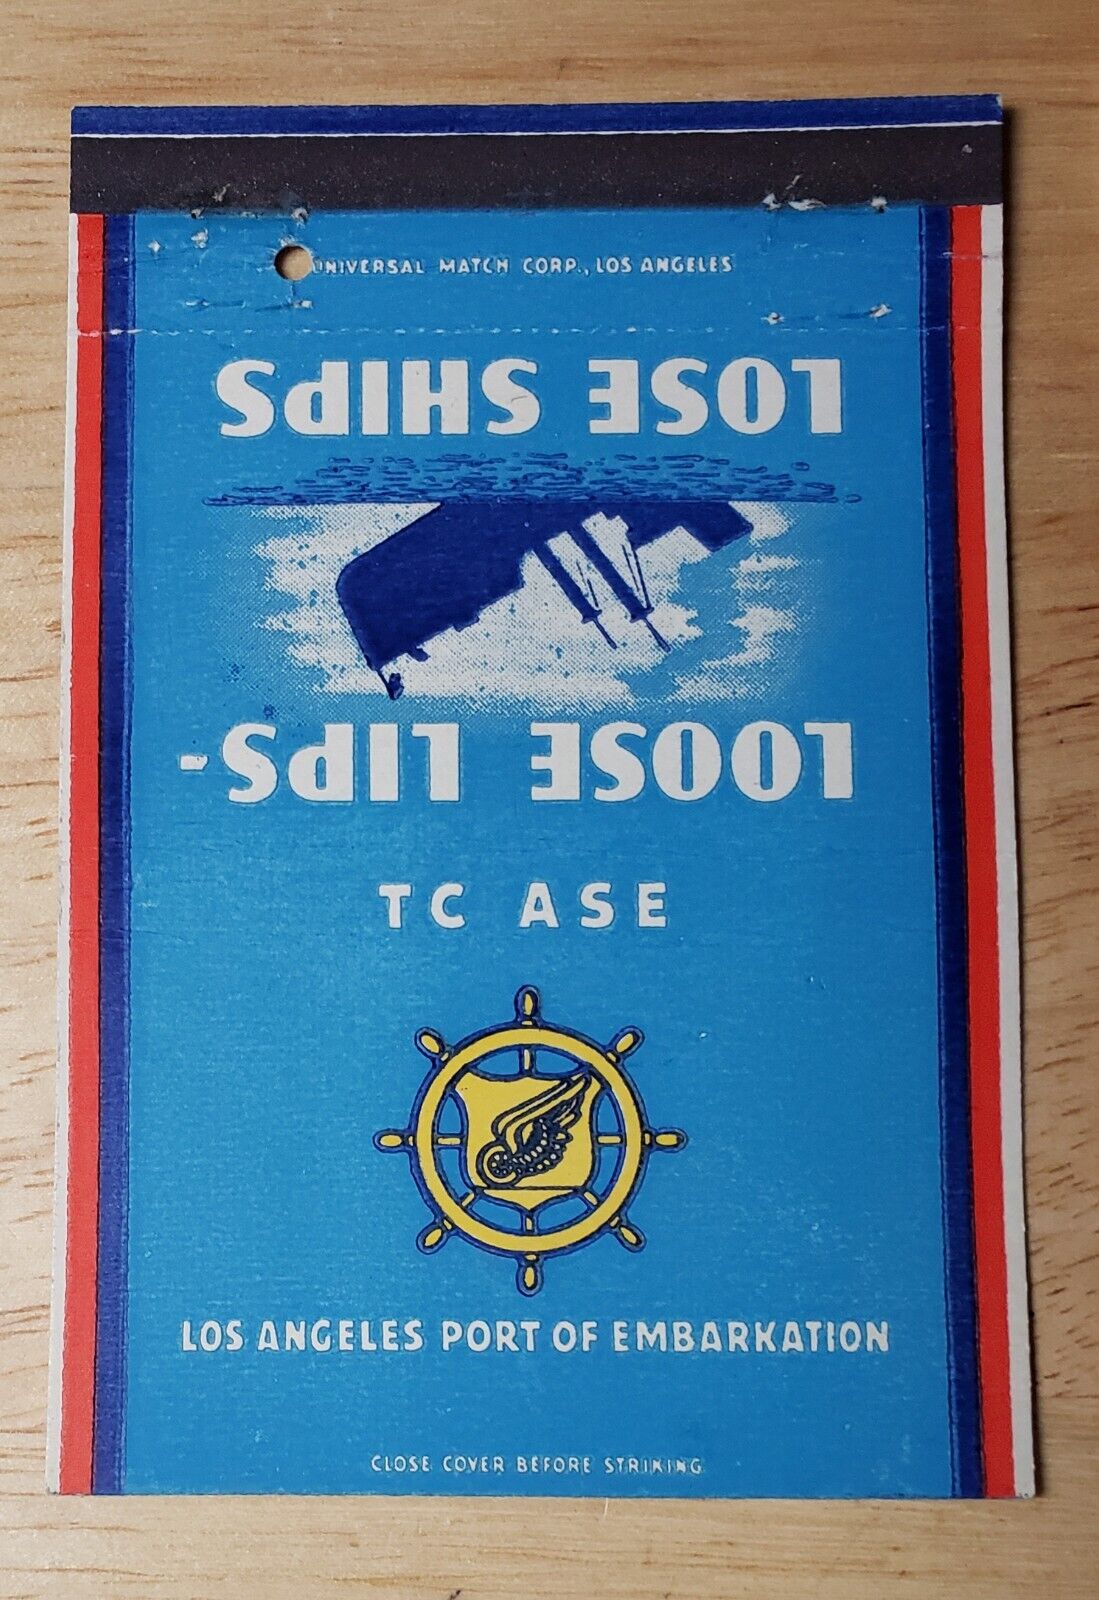 US WWII Military 40 Strike Matchbook Cover Los Angeles California Port of Embark